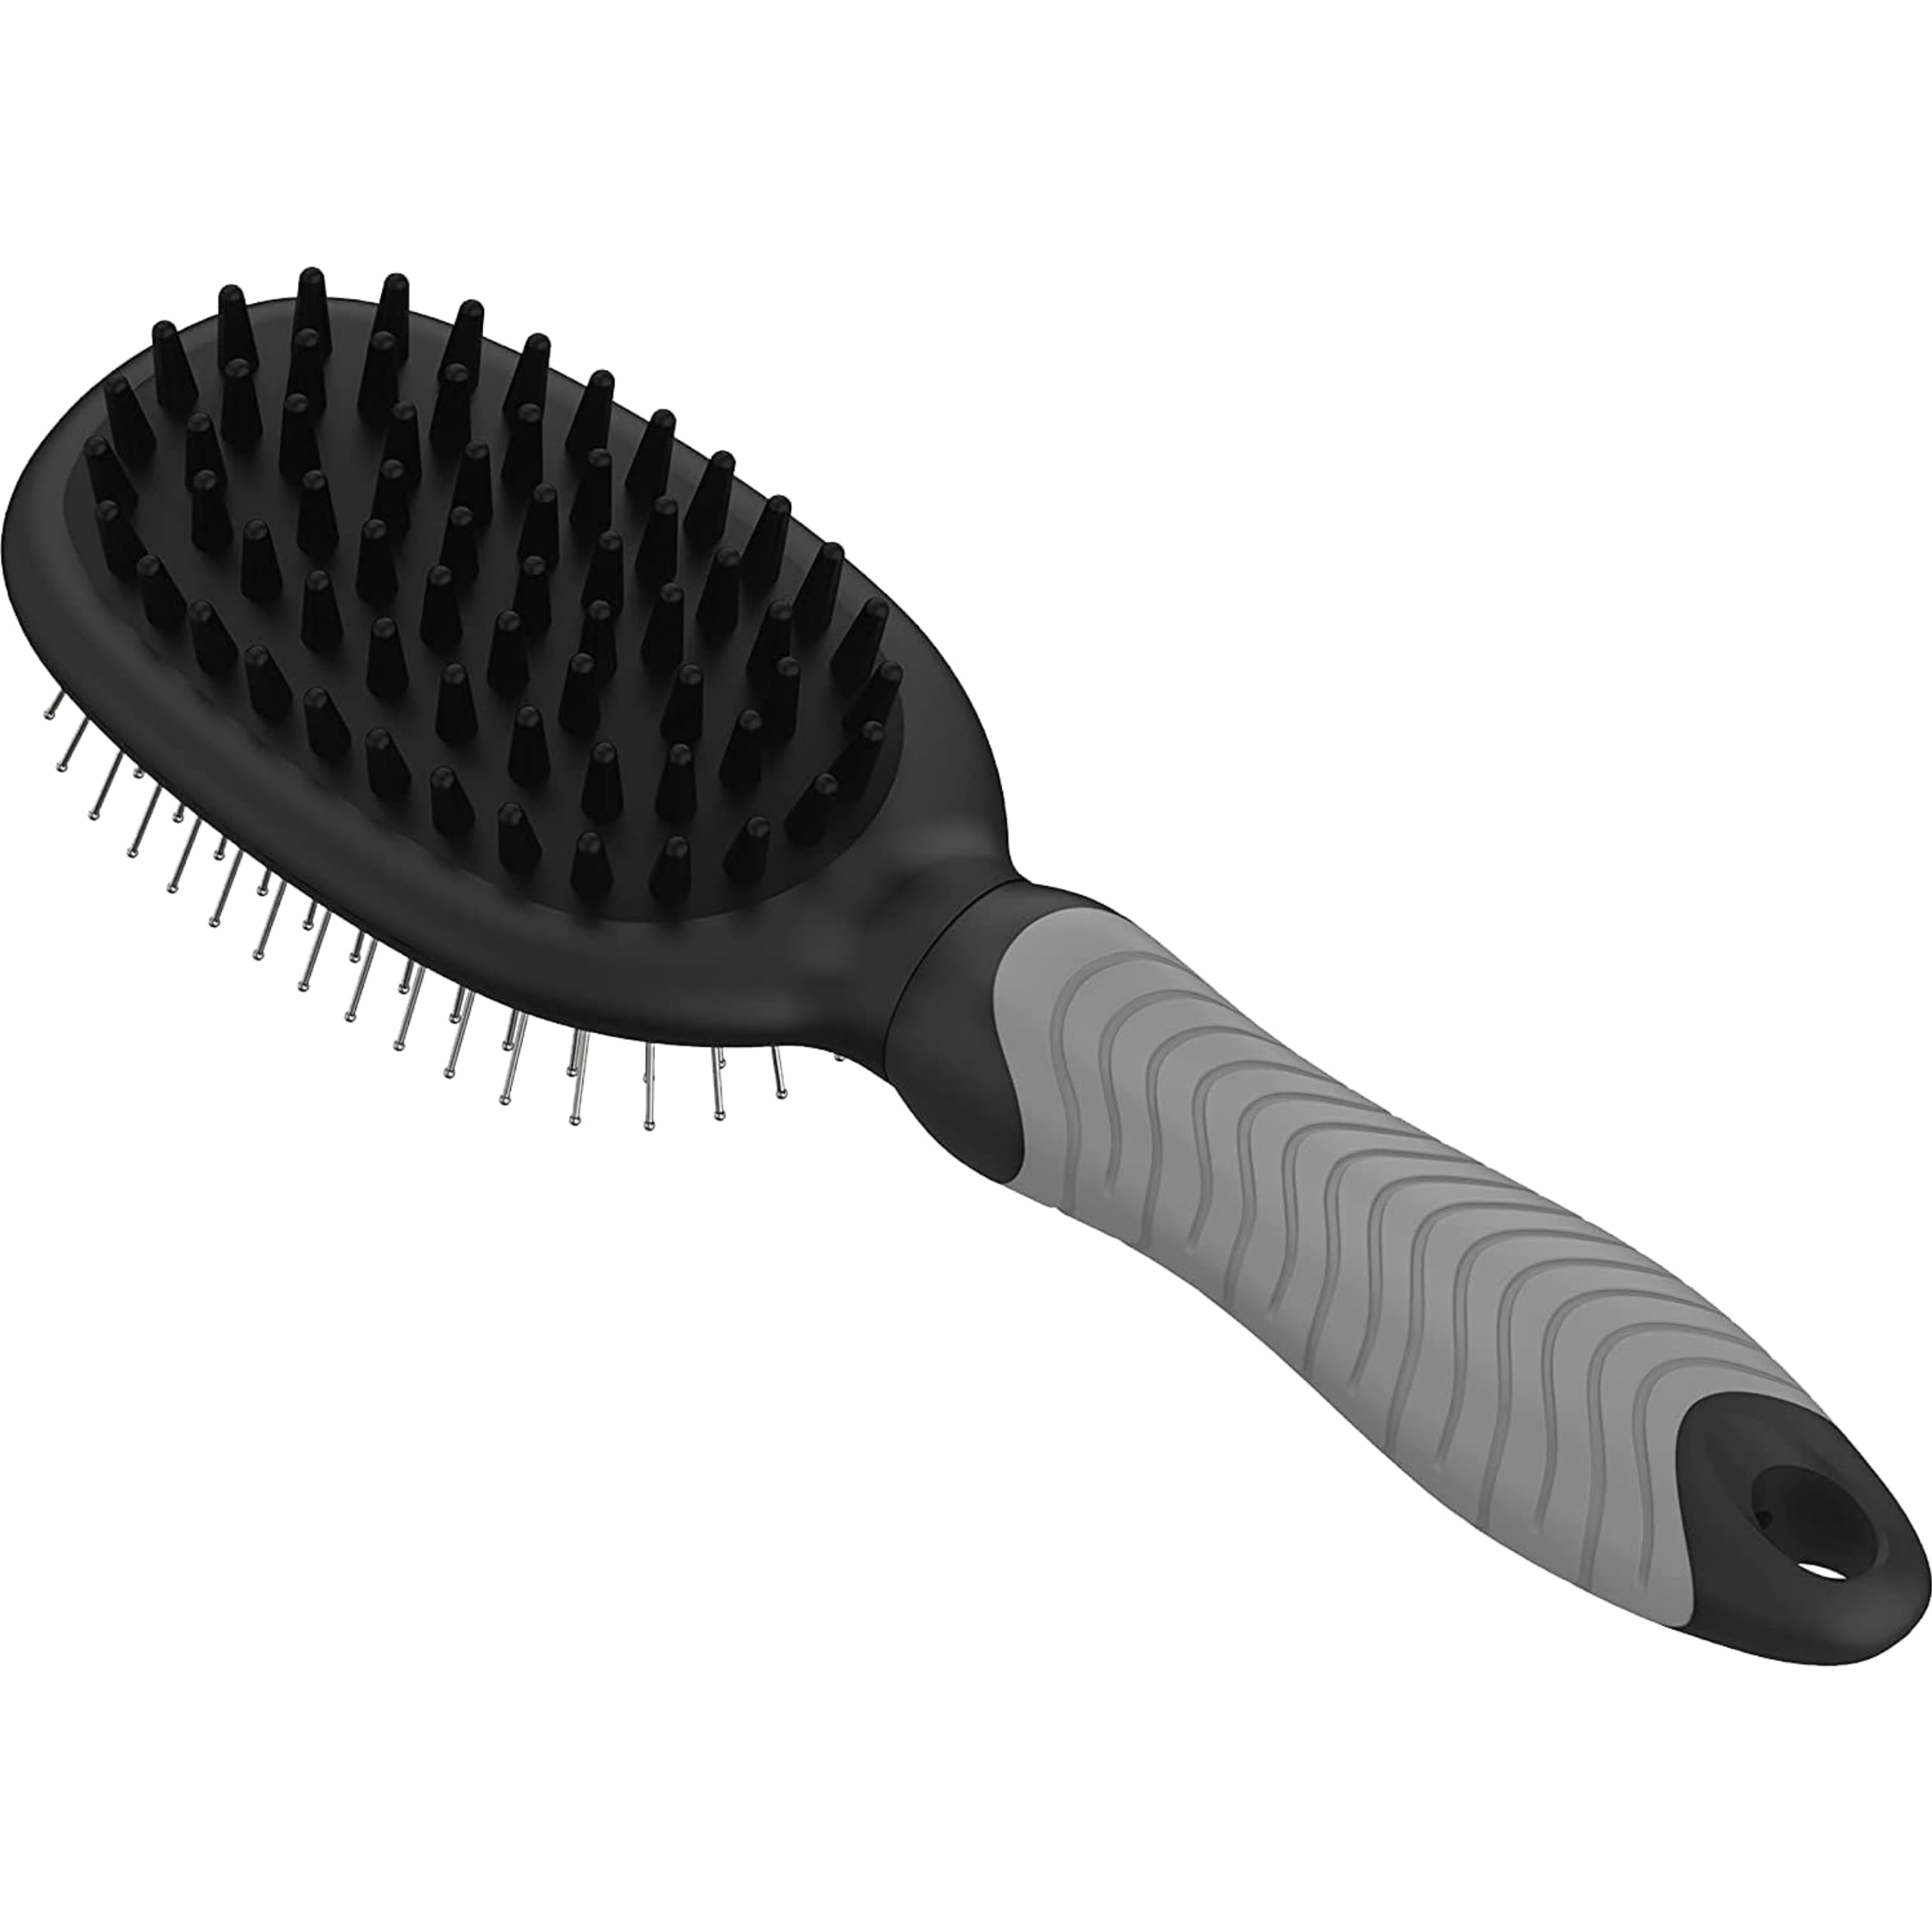 WAHL Professional Animal Double Sided Bath Pin Brush for Dogs (#858477) - Pet Brush to Groom Dogs - For Akitas, Huskies & Australian Shepherds - Durable Dog Pin Brush